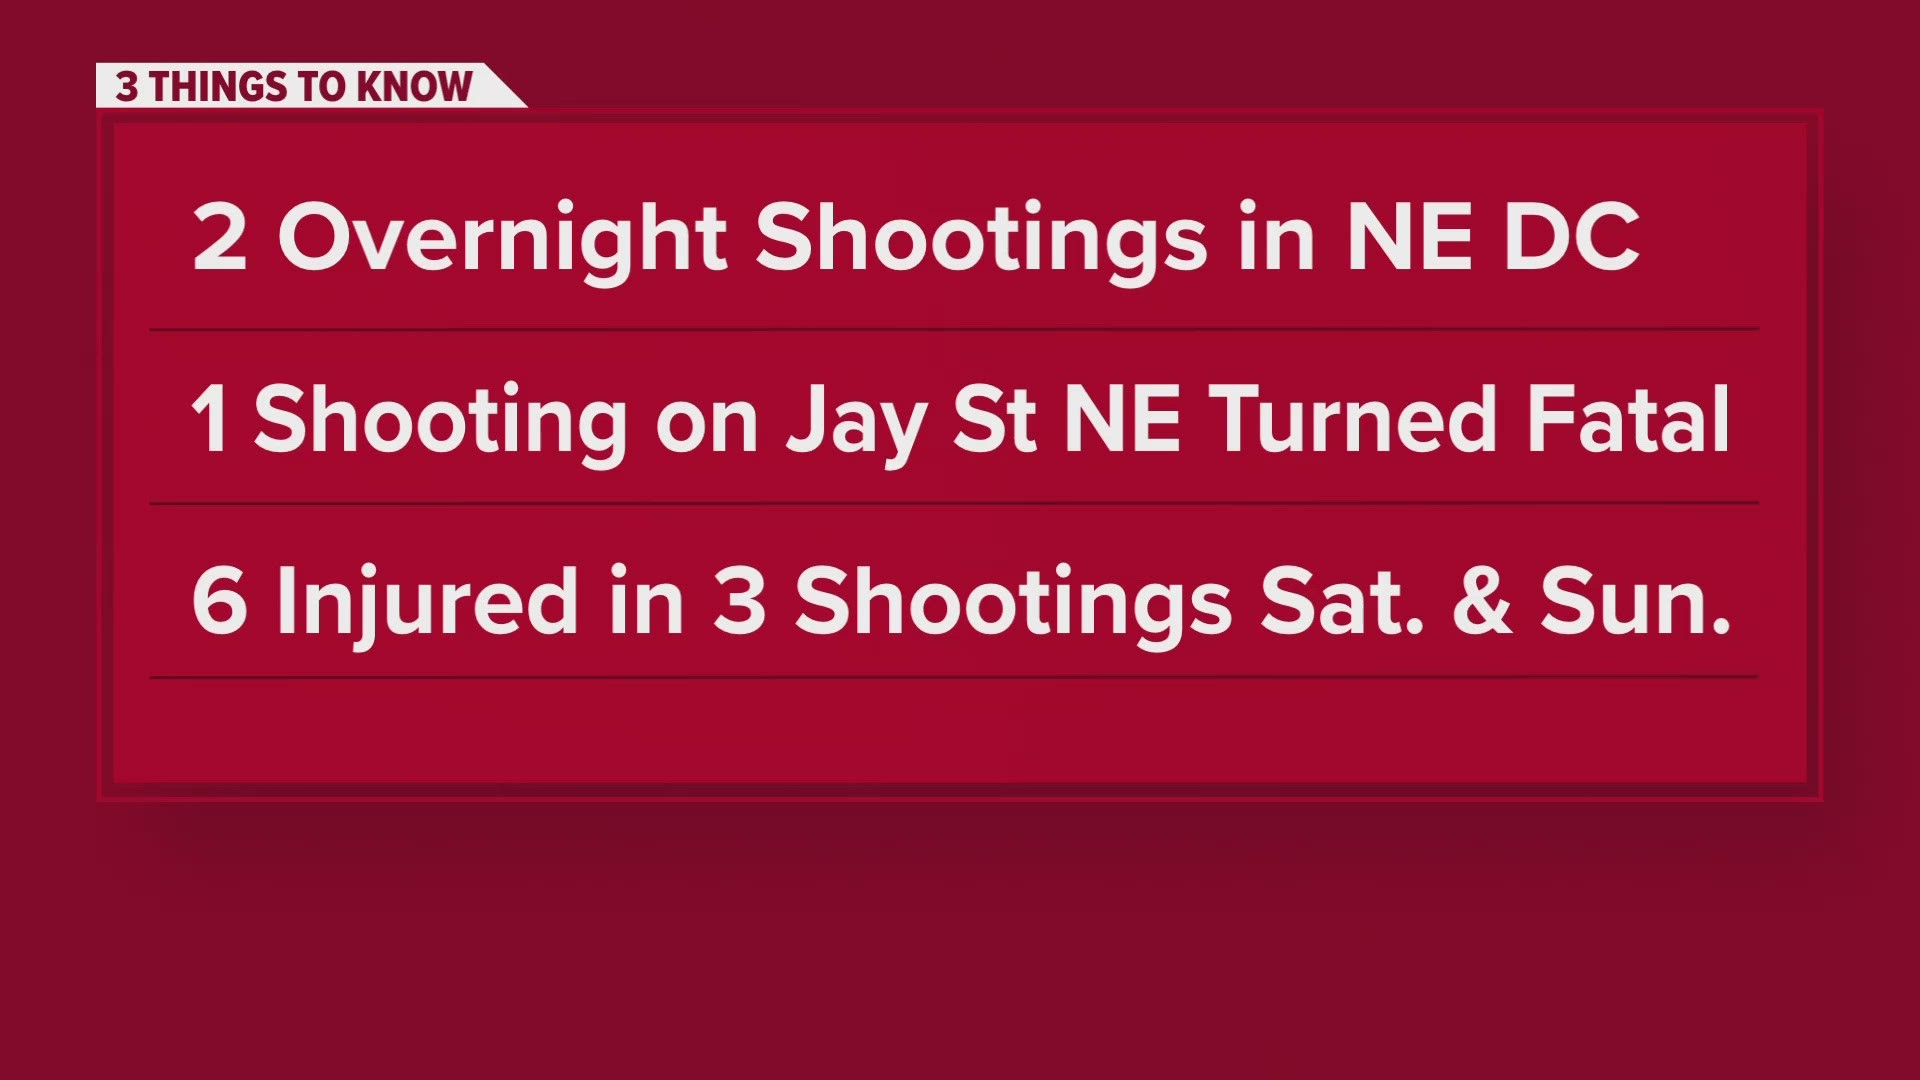 This shooting follows a violent weekend on DC streets.